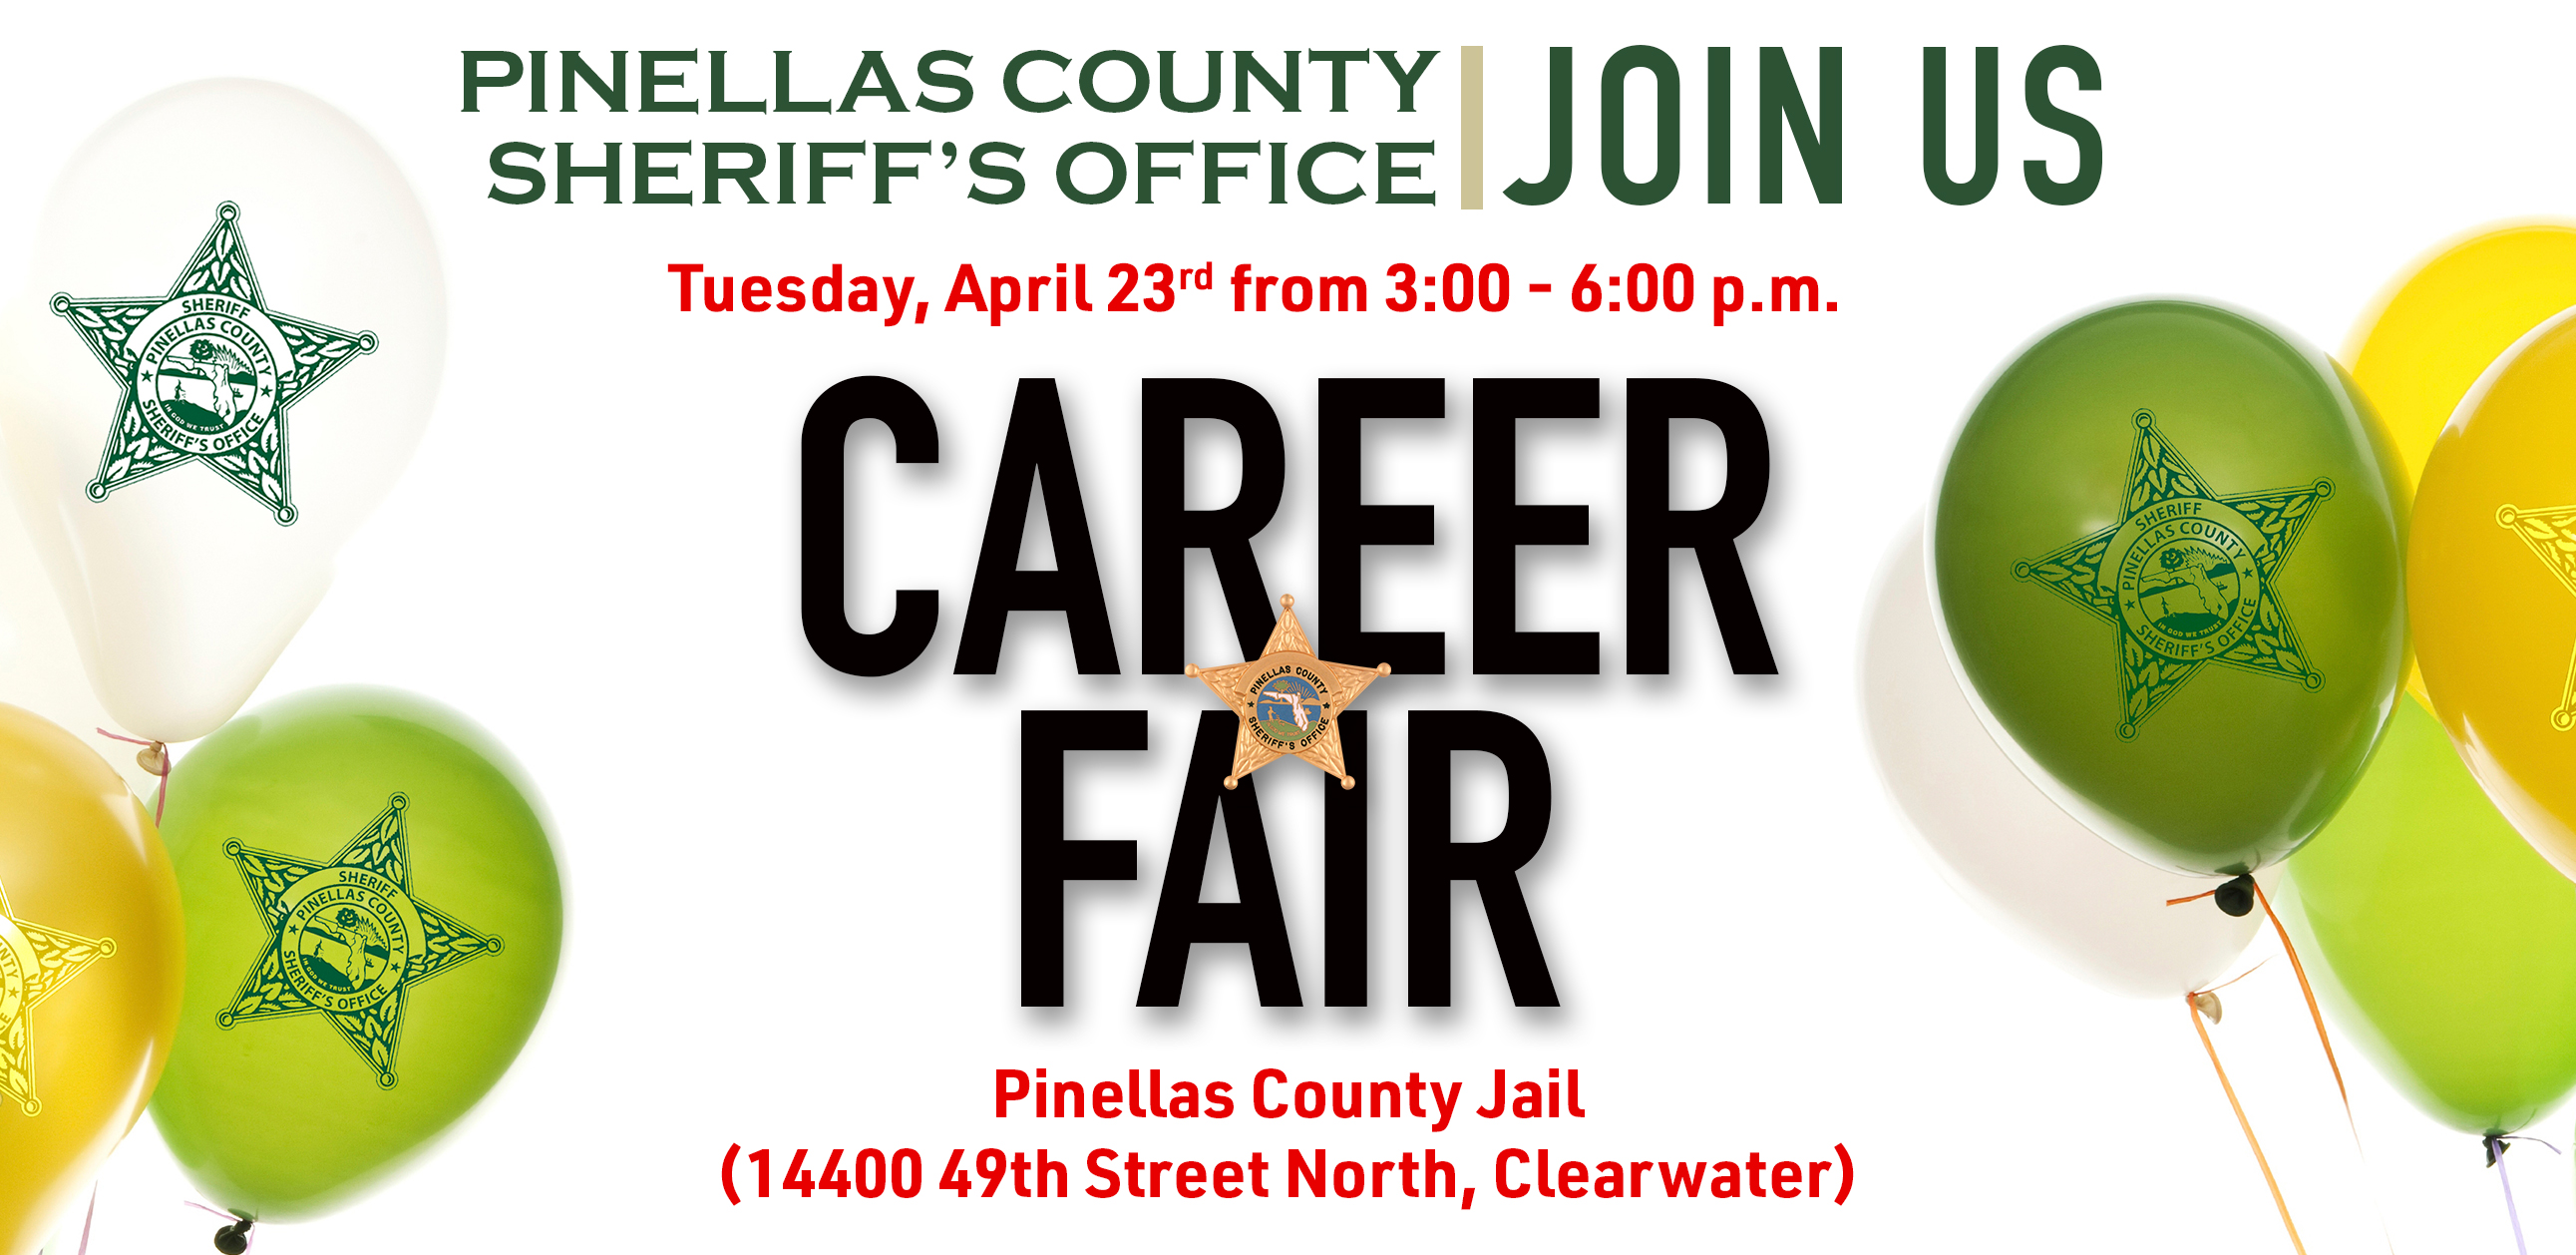 Join Us Tuesday April 23rd from 3:00pm - 6:00pm, Career Fair, Pinellas County Jail